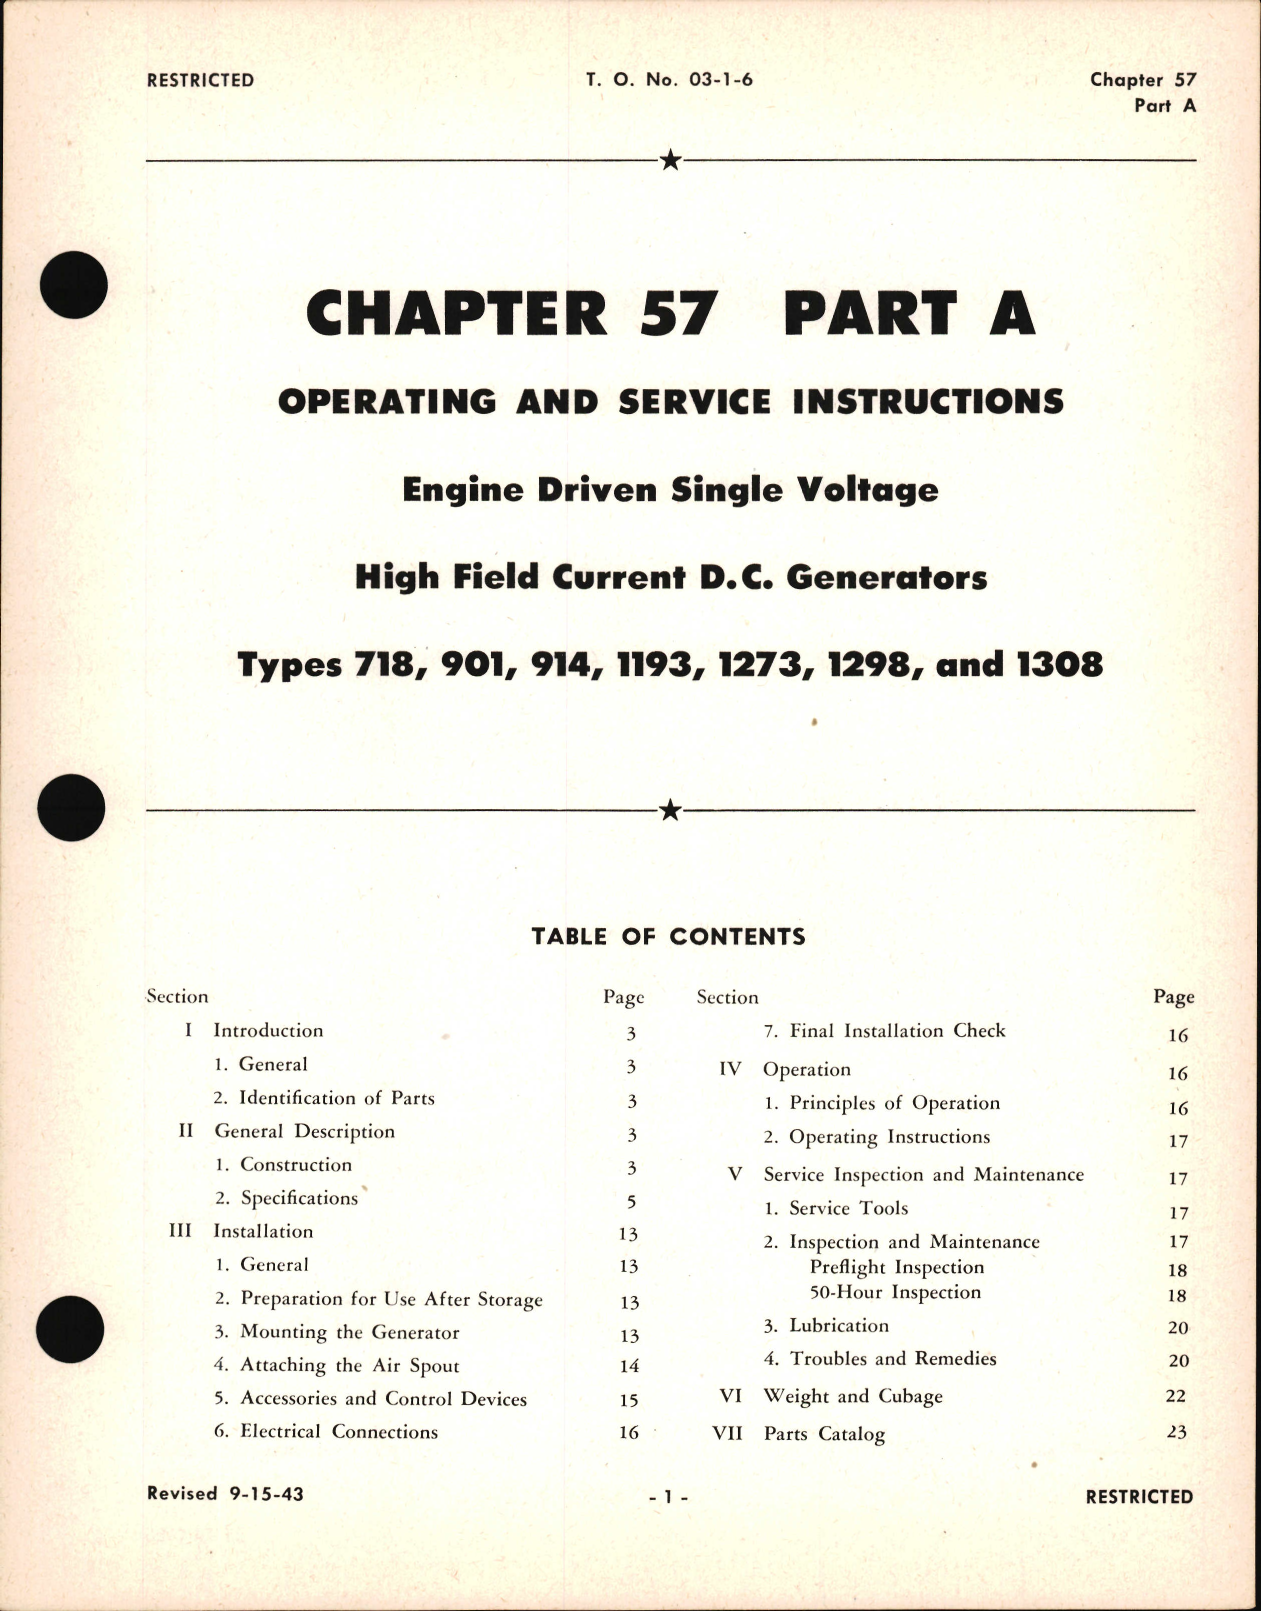 Sample page 1 from AirCorps Library document: Operating and Service Instructions for Engine Driven Single Voltage High Field Current D.C. Generators, Ch 57 Part A